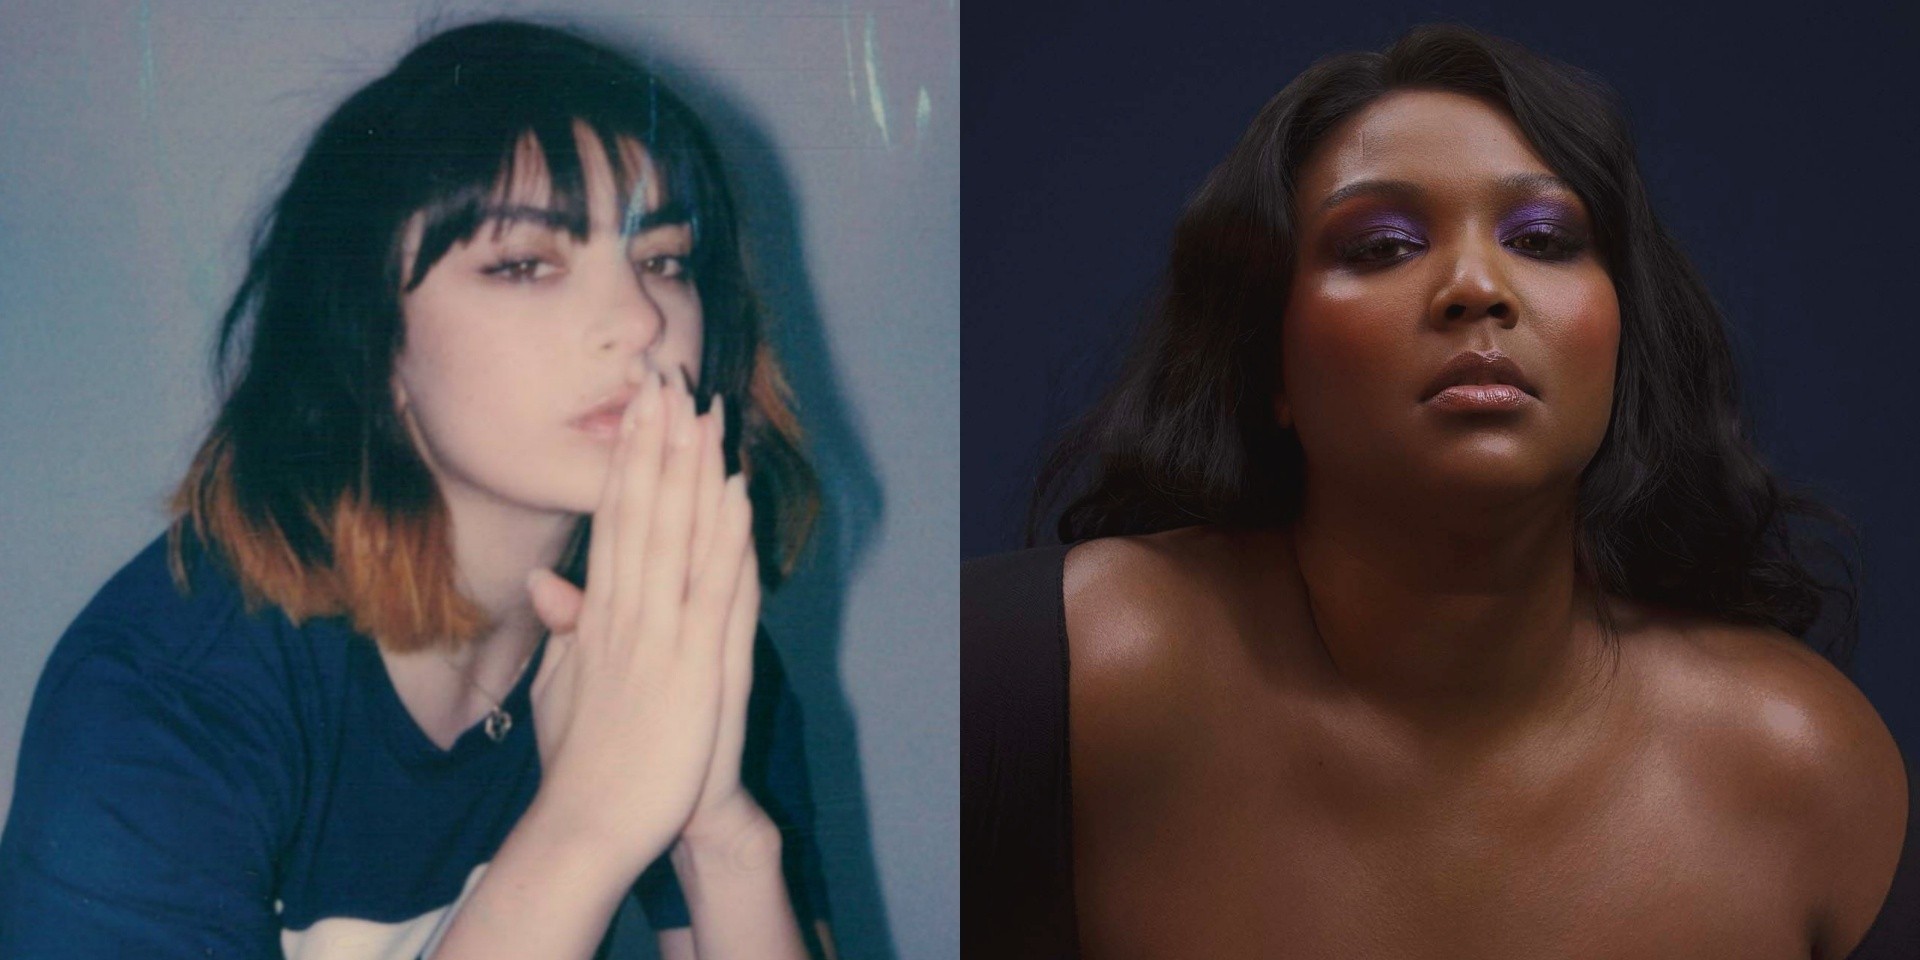 Charli XCX and Lizzo's collaboration to be released this week